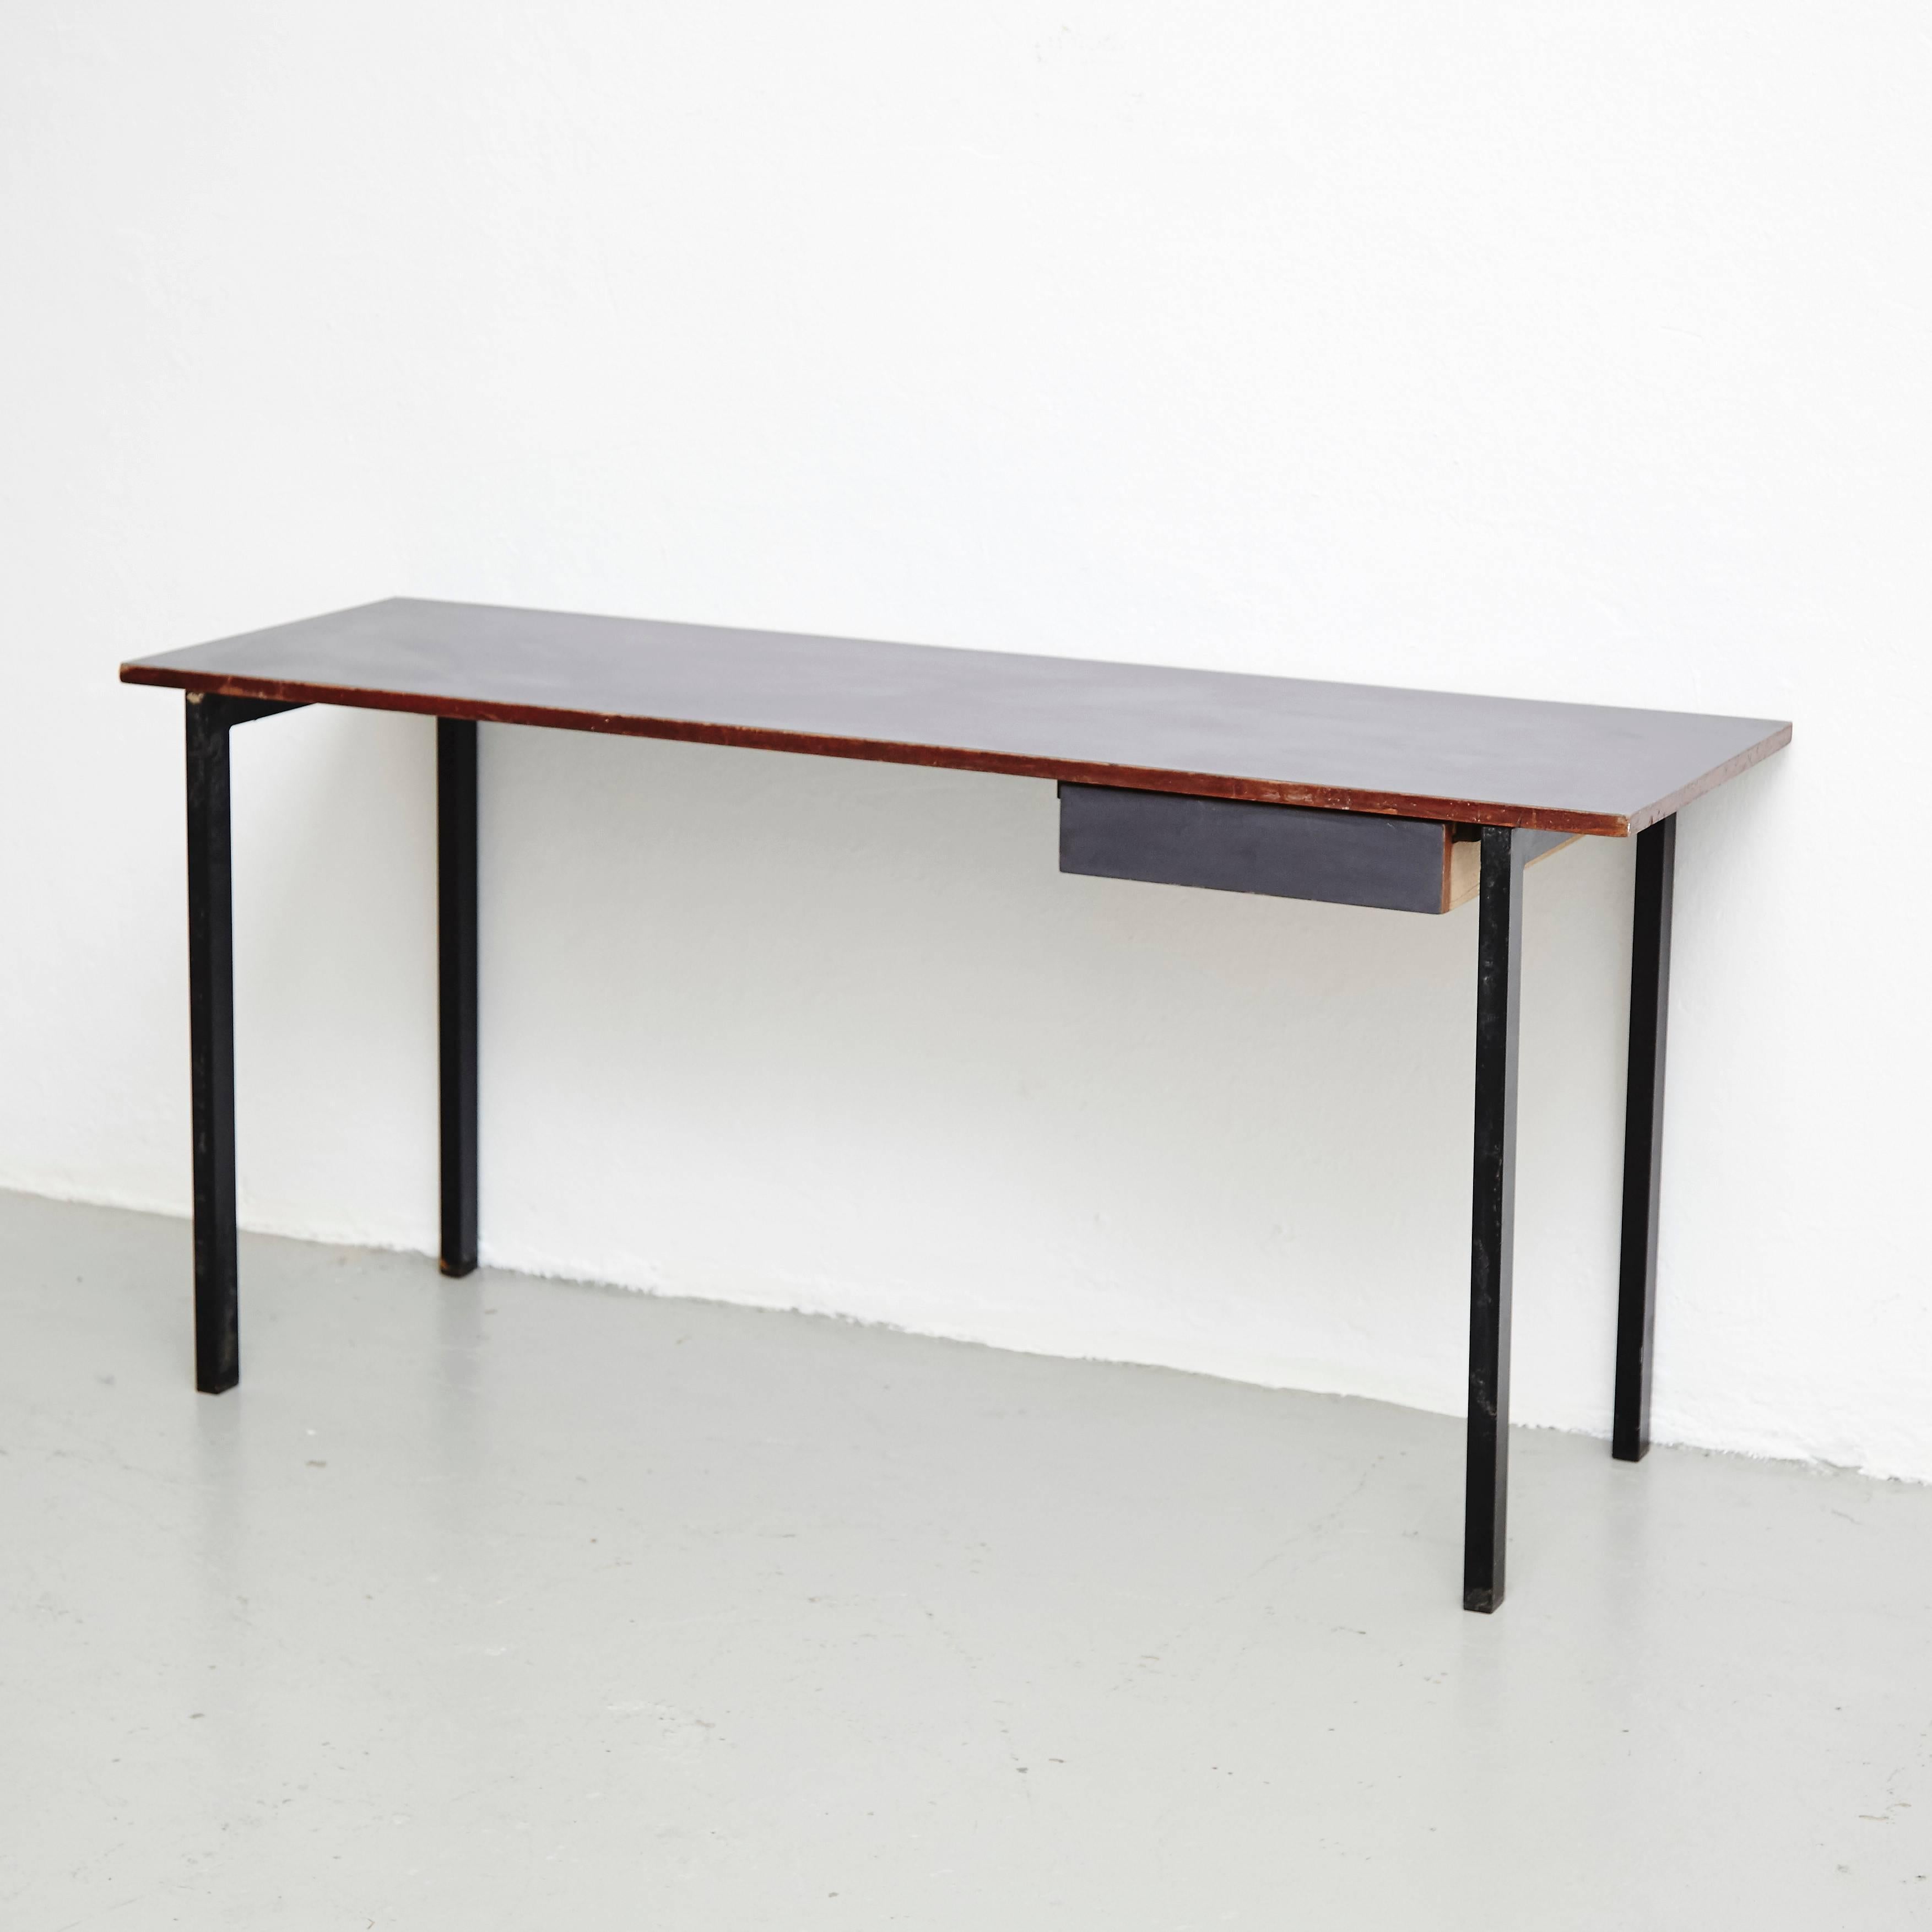 Console from Cite Cansado, Mauritania, designed by Charlotte Perriand.

Wood laminated in formica, structure lacquered metal and fabric.

In good original condition, with minor wear consistent with age and use, preserving a beautiful patina.